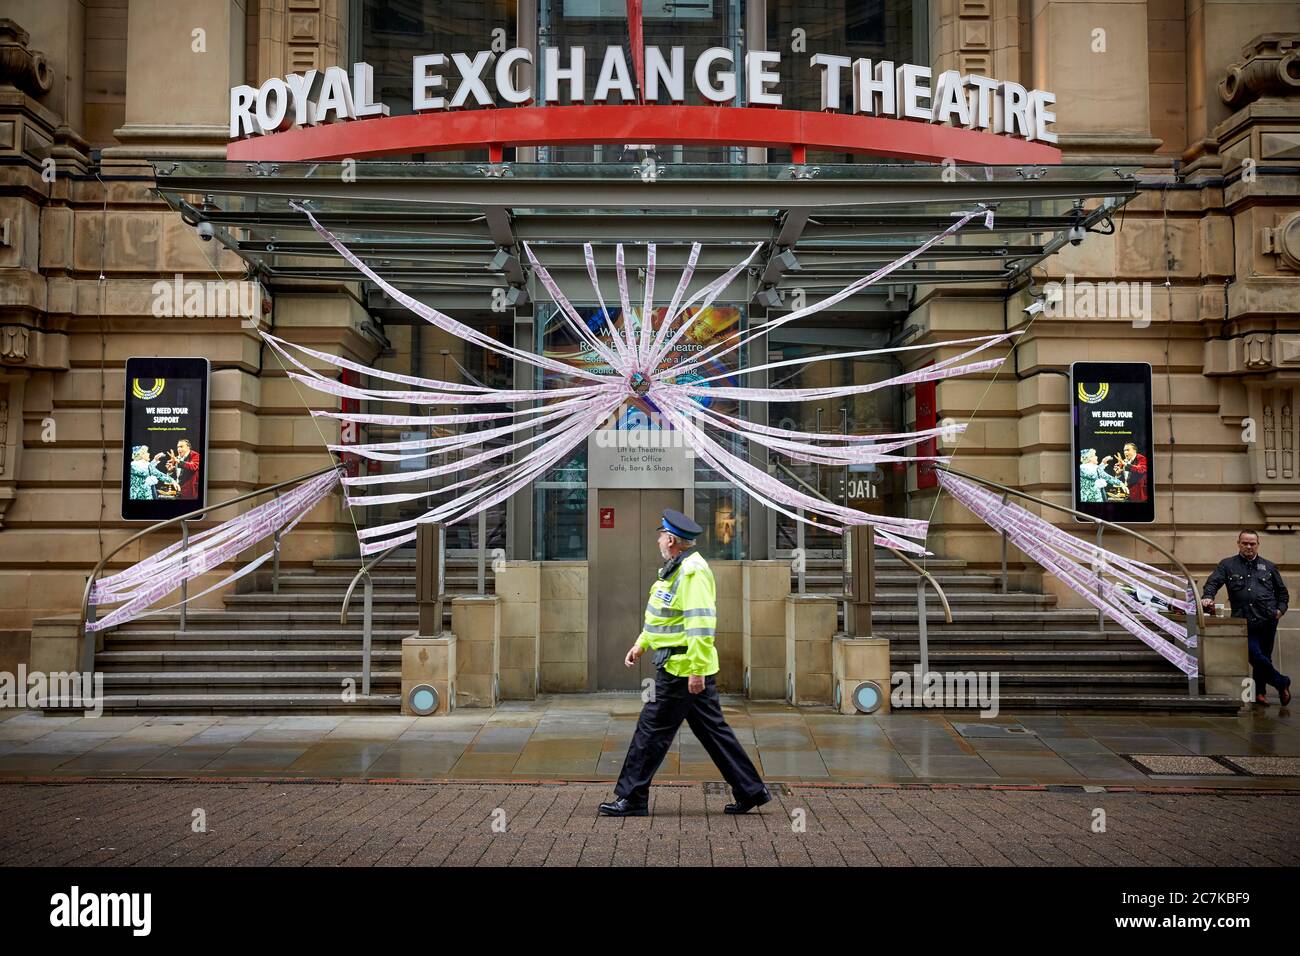 Royal Exchange Theatre in Manchester closed because of the Covid 19 pandemic Stock Photo